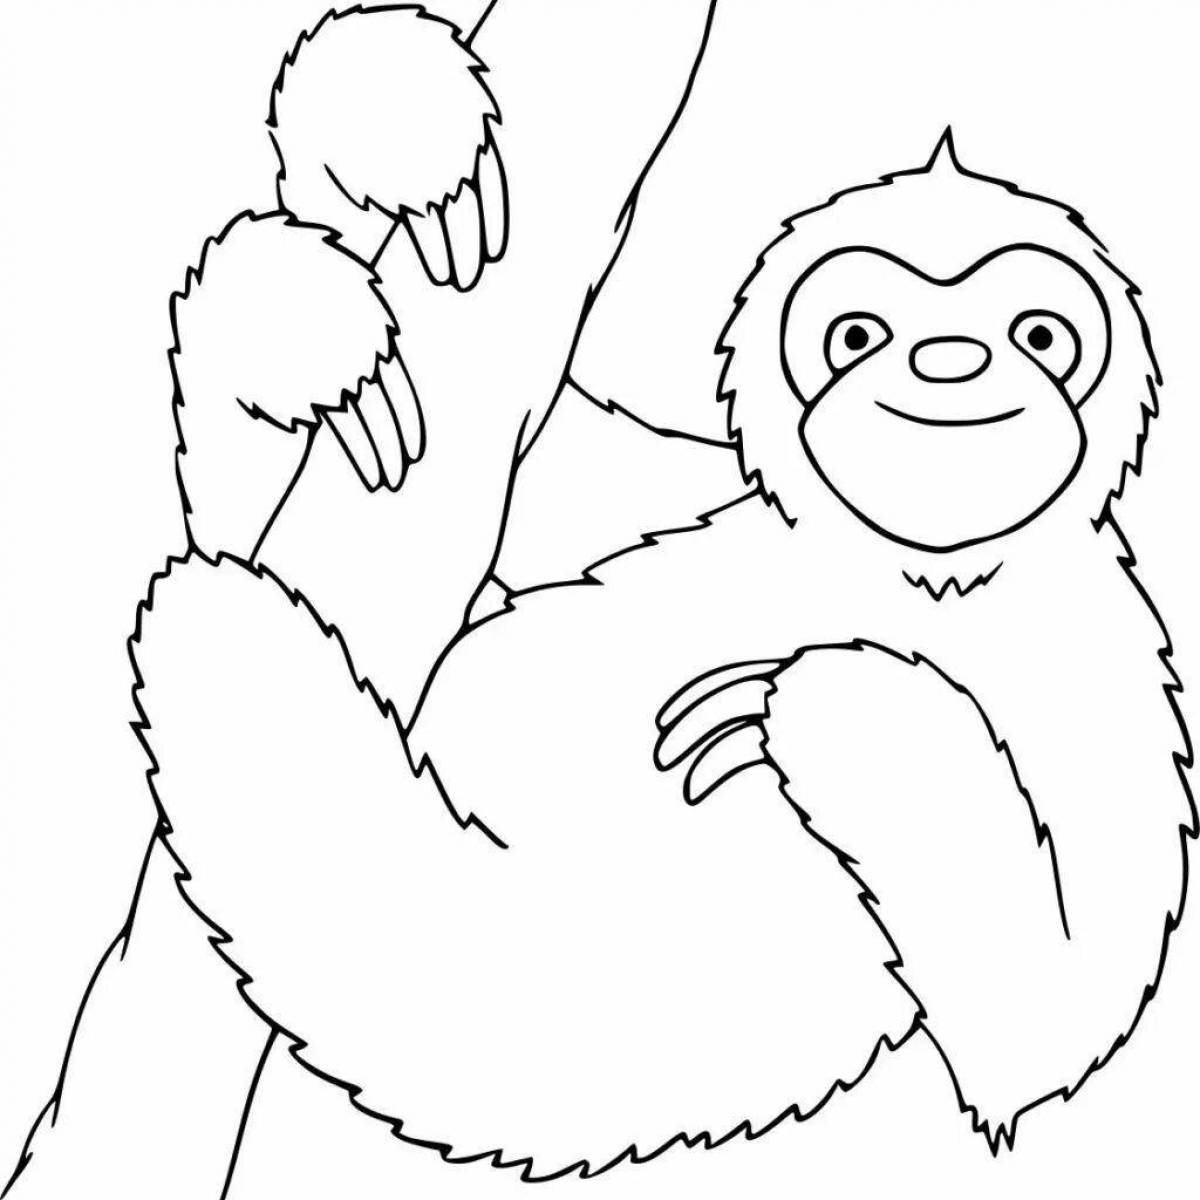 Coloring book happy sloth for kids